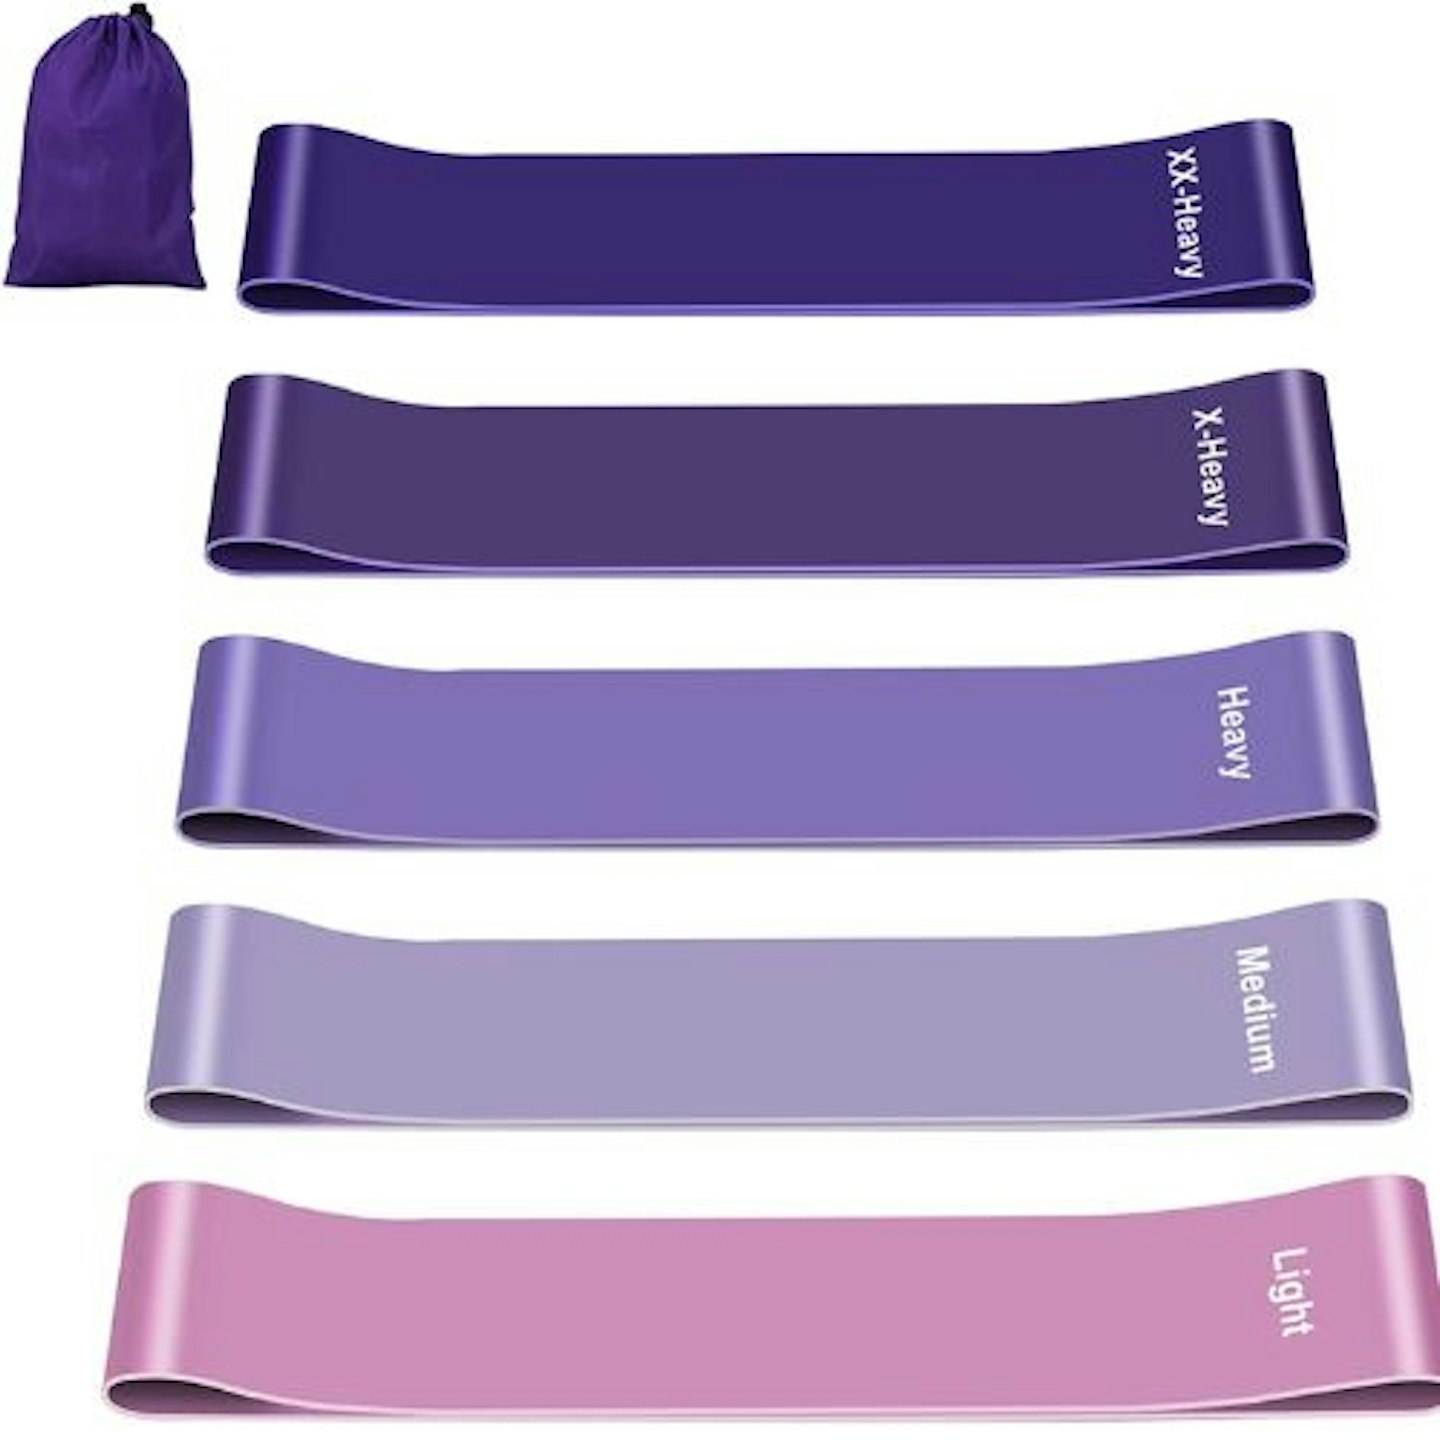 Resistance Bands [Set of 5], resistance band for Women and Men, Skin-Friendly Resistance Fitness Exercise Loop Bands 5 Levels for Legs and Glutes,Arms...